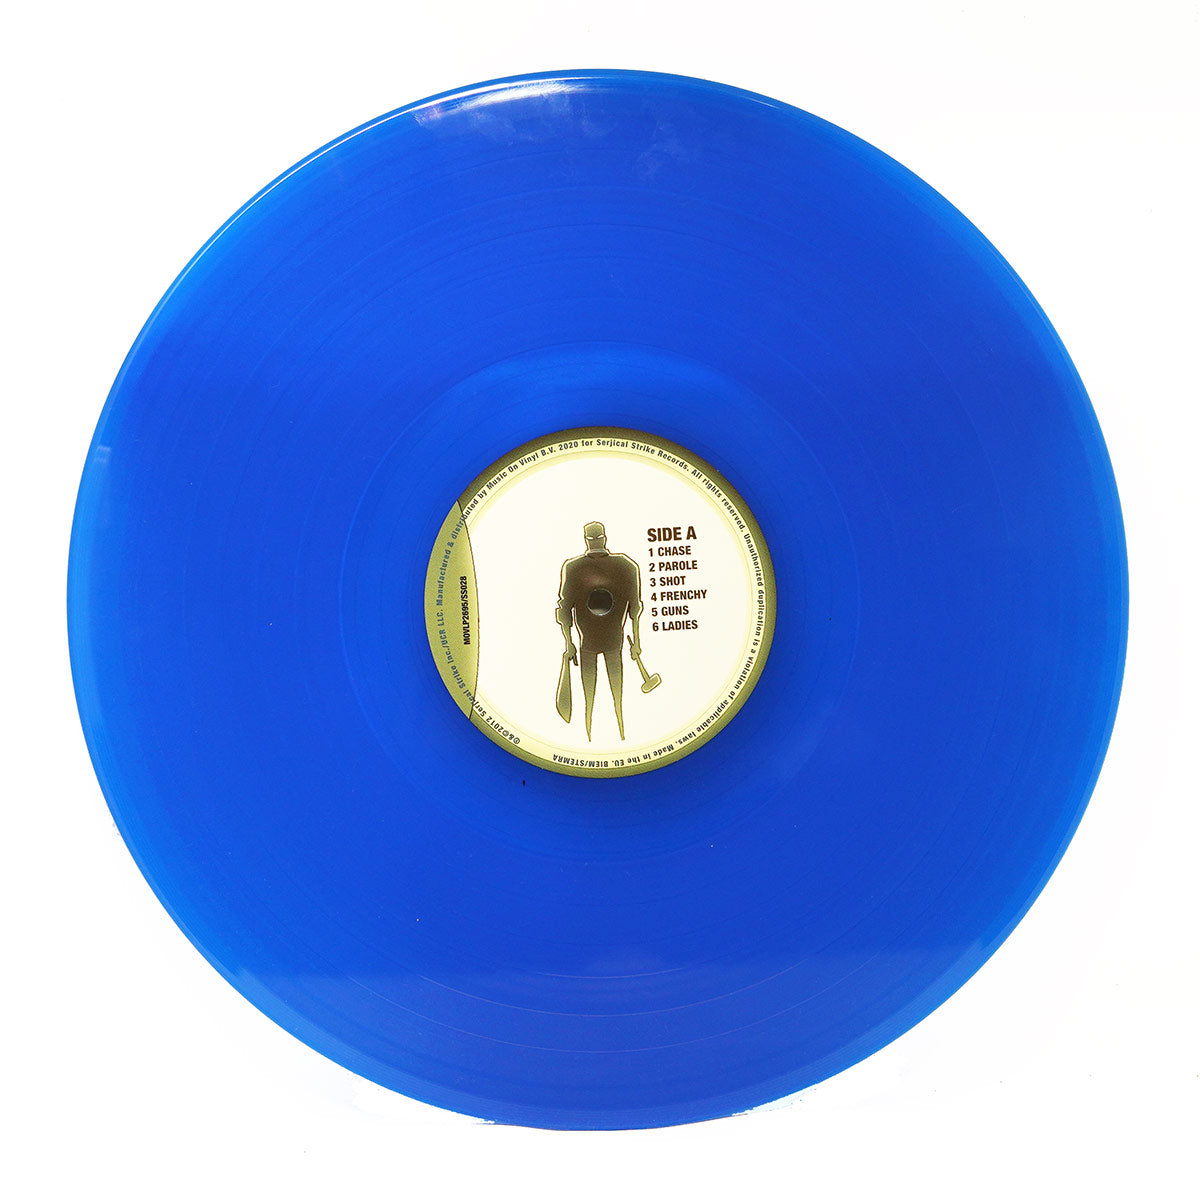 Fuktronic - Colored Vinyl - Autographed - Limited Edition